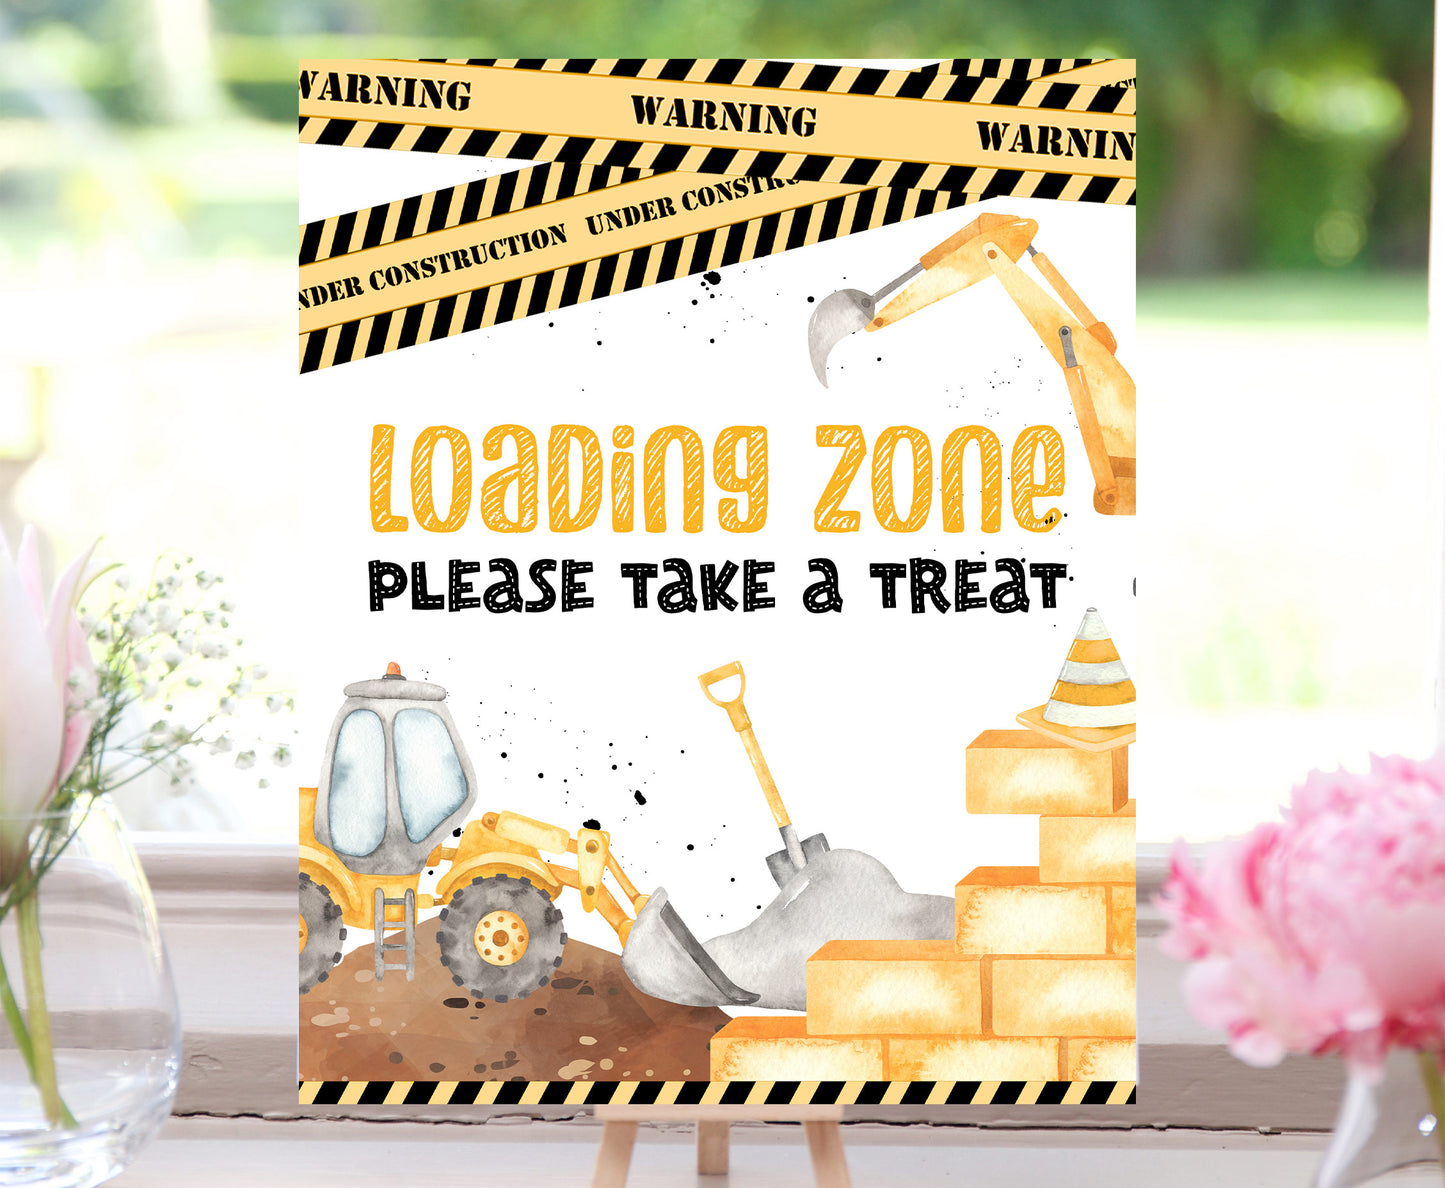 Loading Zone Table Sign Printable | Construction Party Table Decoration - 07A